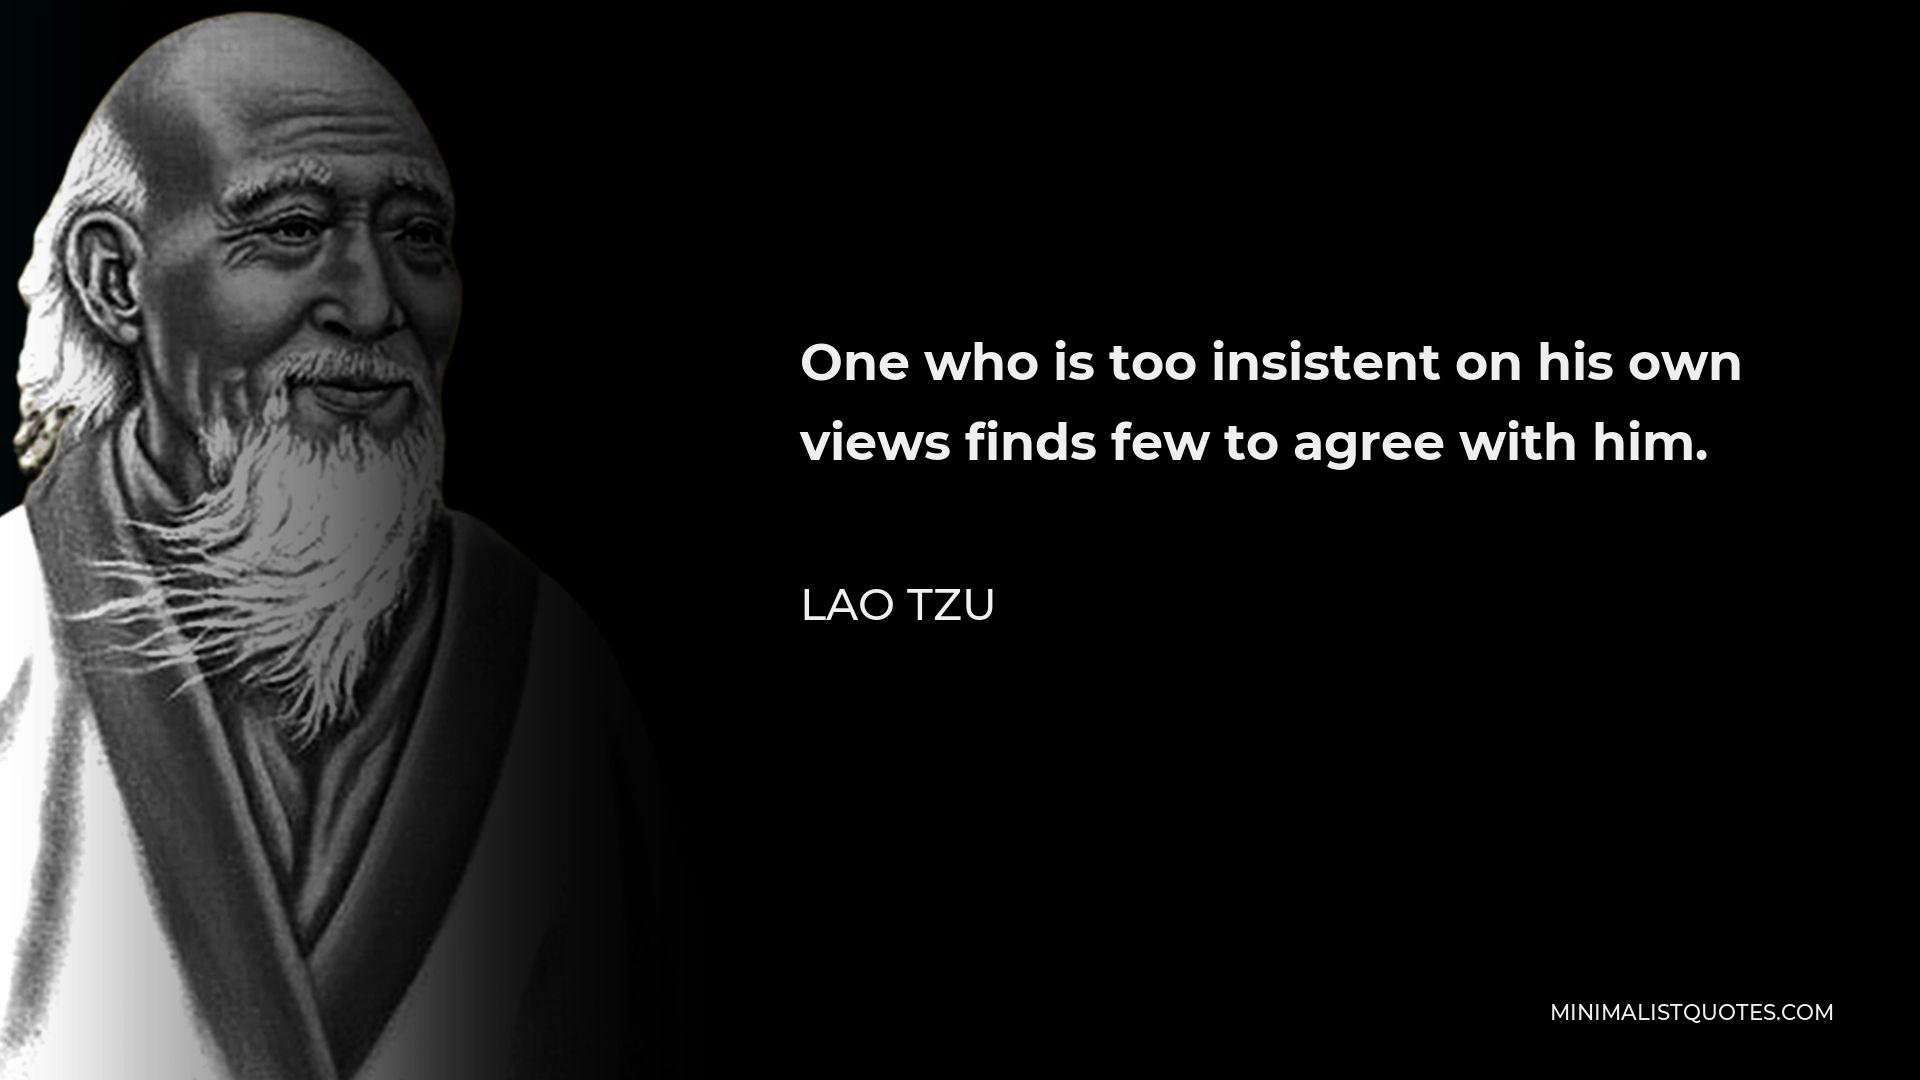 Lao Tzu Quote - One who is too insistent on his own views finds few to agree with him.